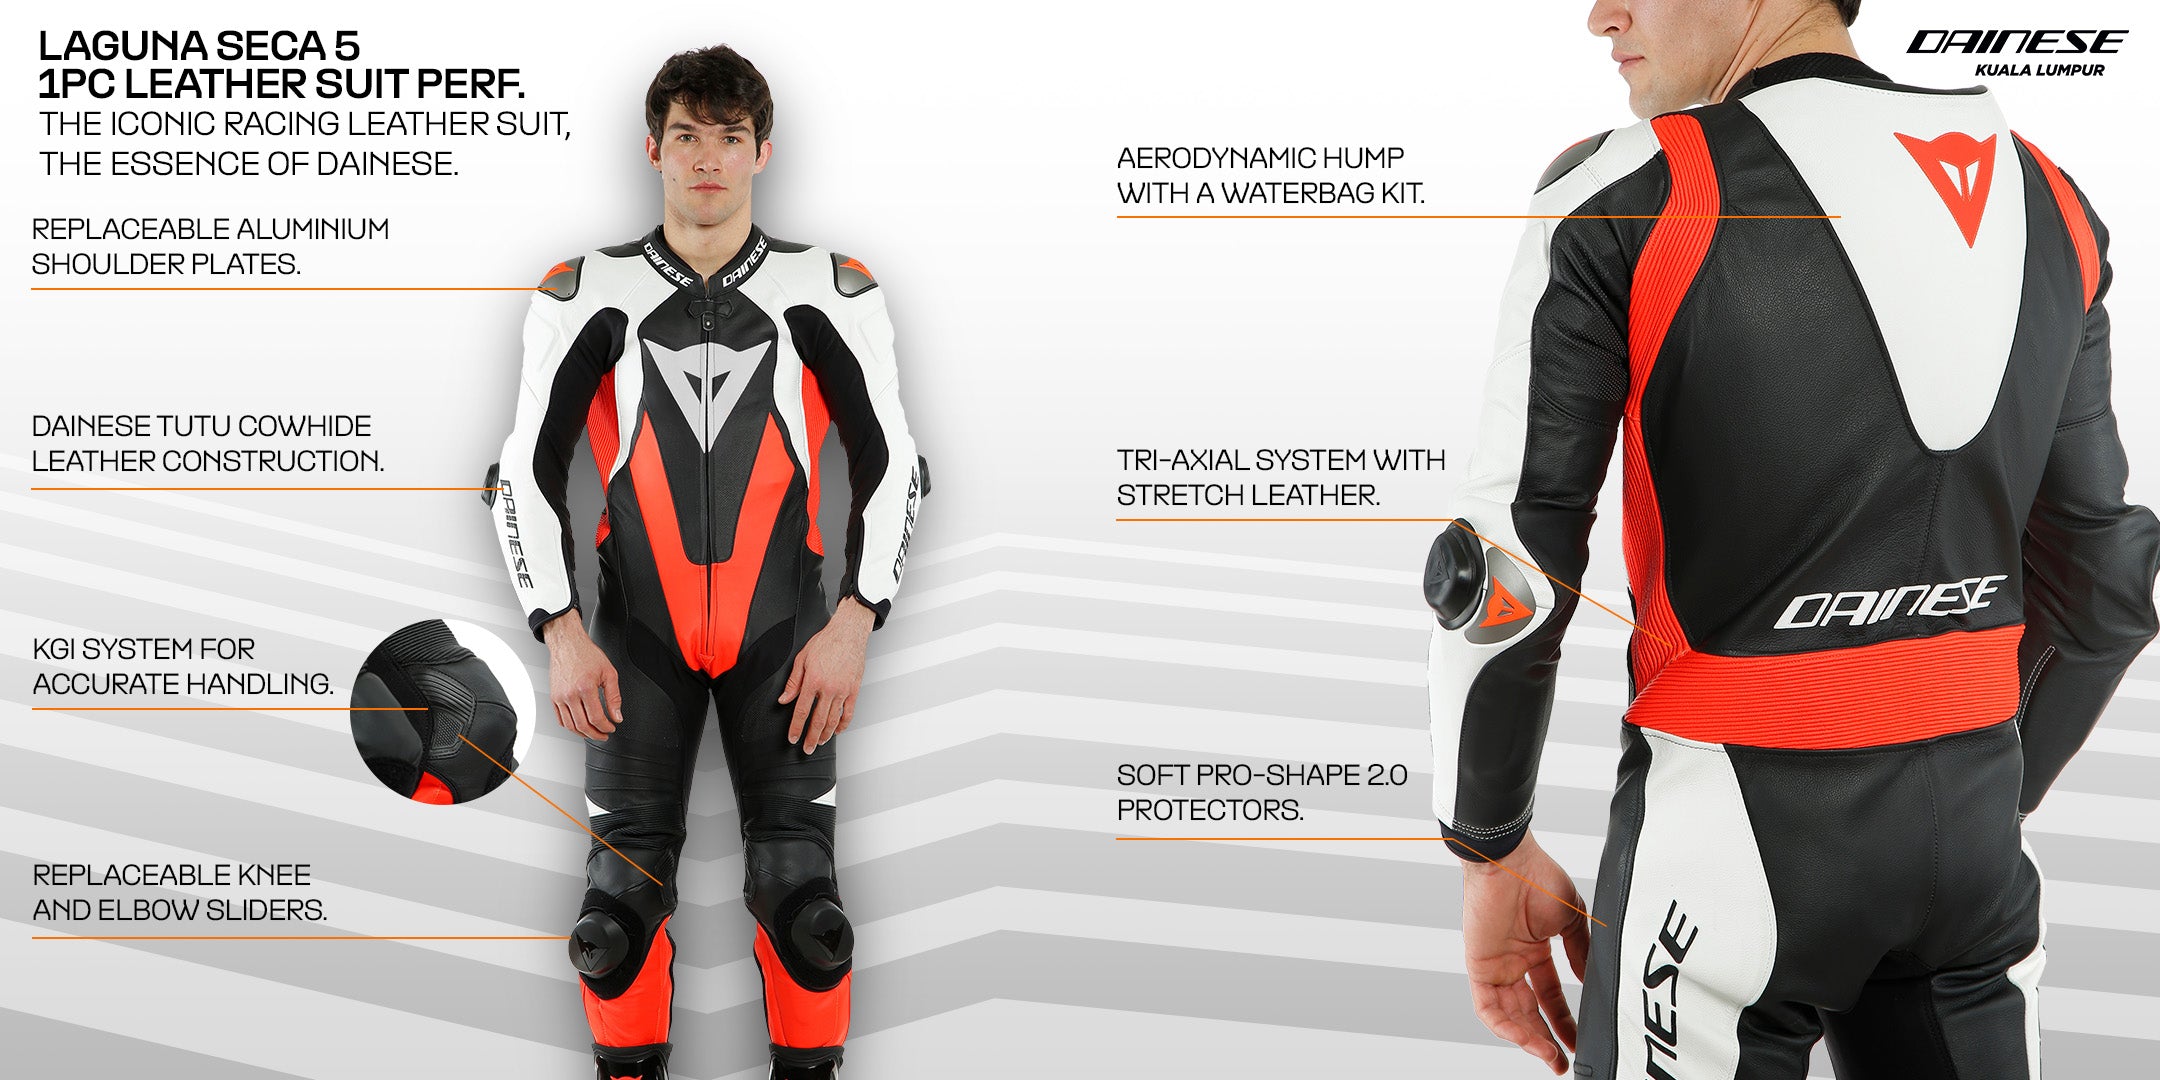 Dainese Laguna Seca 5 1Pc Suit Perforated N32 - Worldwide Shipping!